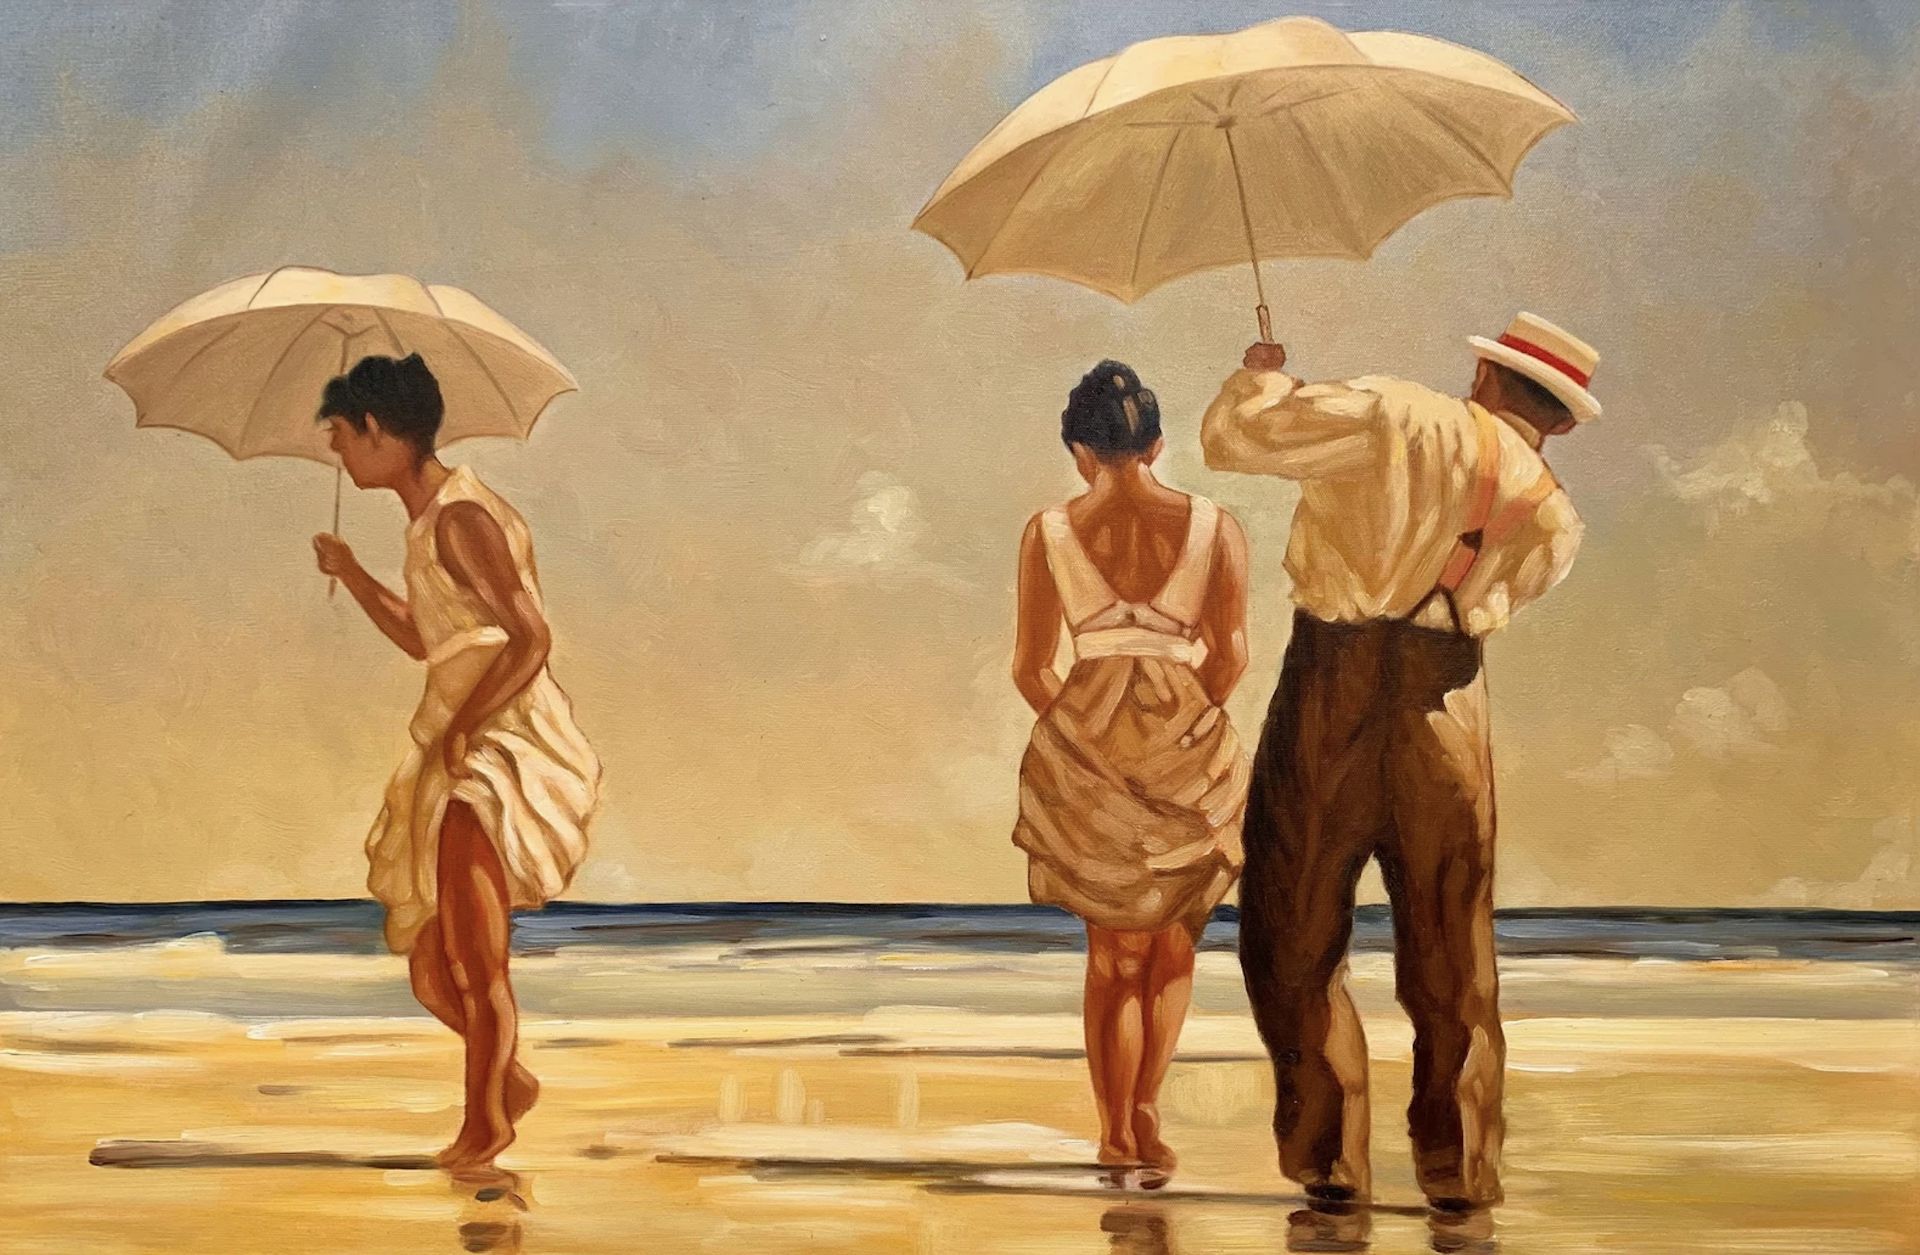 Jack Vettriano "Mad Dogs" Oil Painting